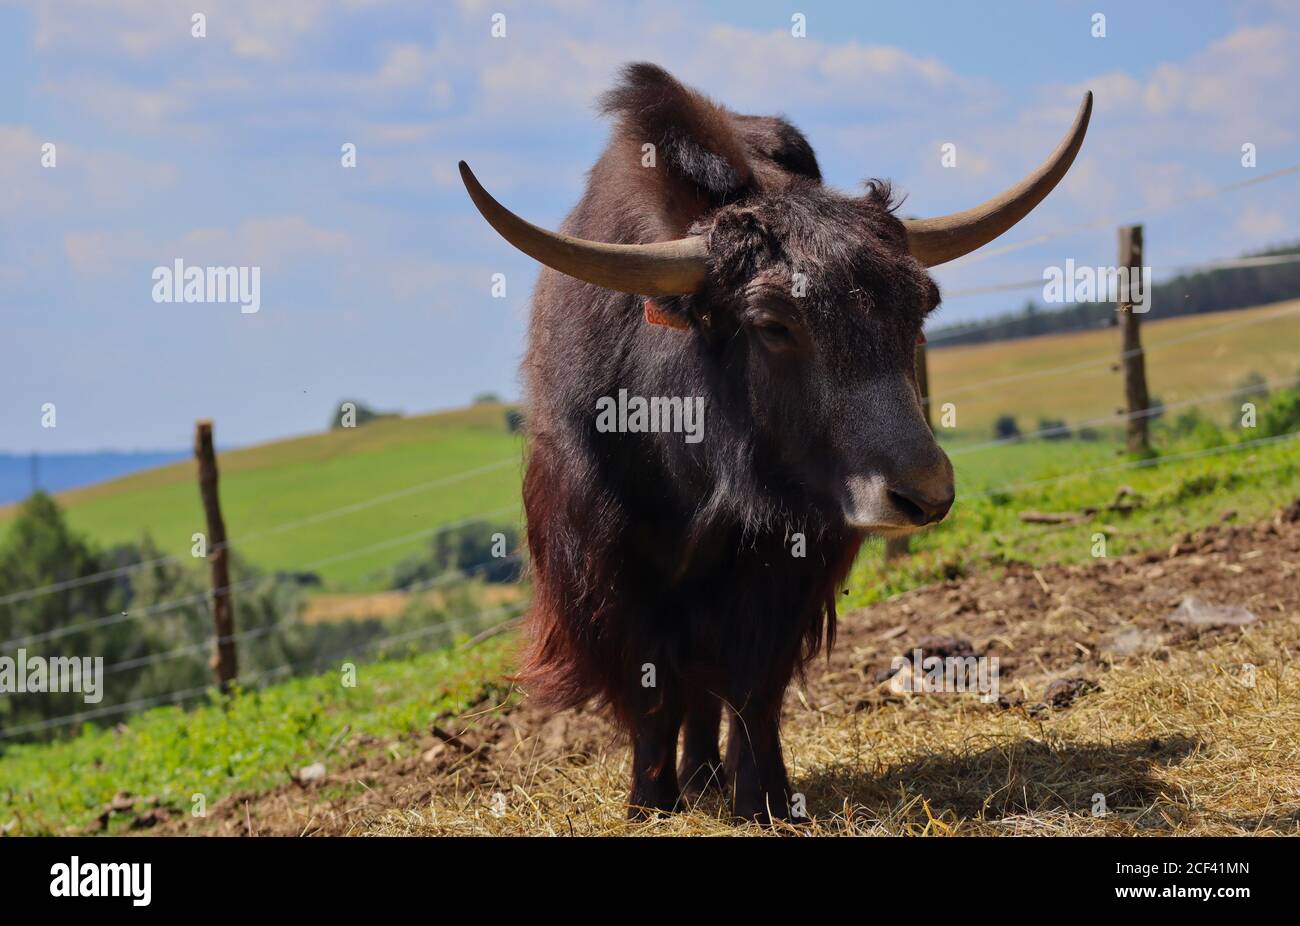 Domestic Yak (Bos Grunniens) is a Long-Haired Domesticated Bovid. Big Heavy Bull Animal during Sunny Day in Czech Farm Park. Stock Photo